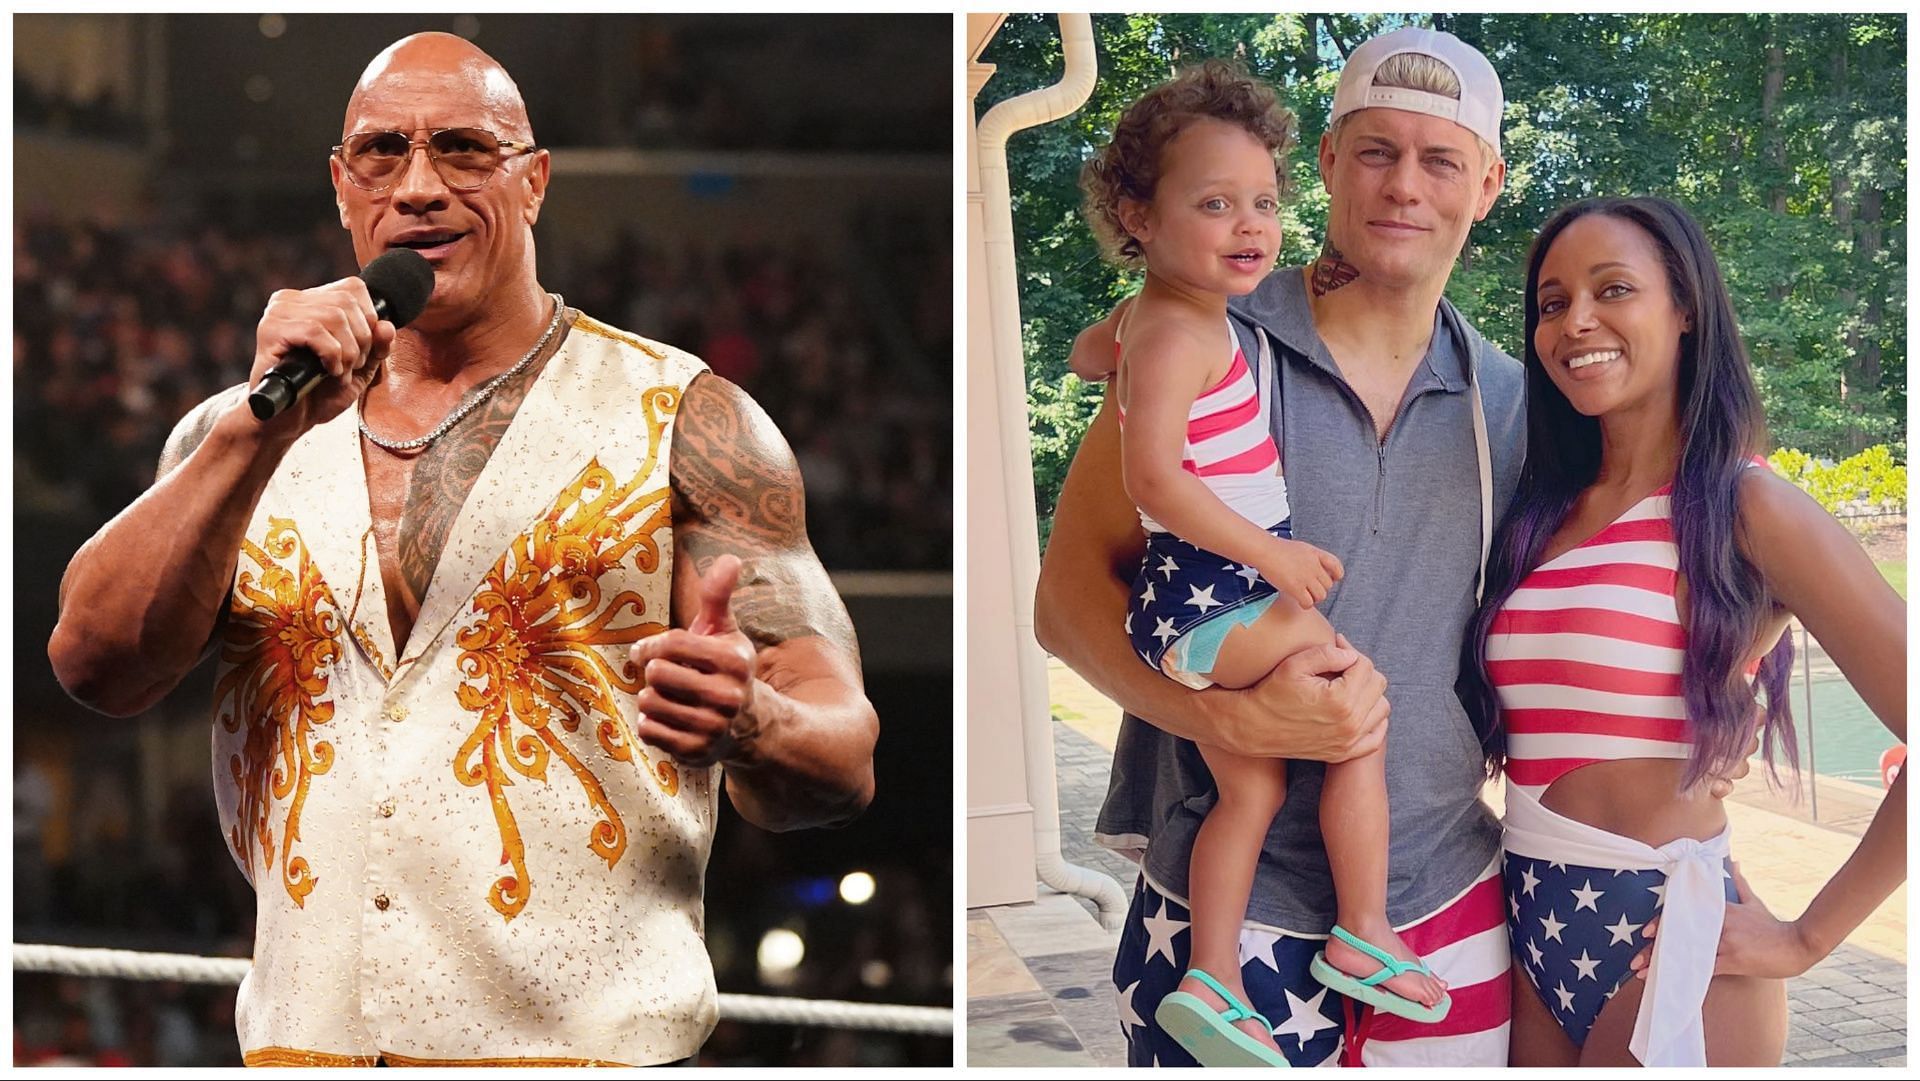 The Rock speaks on WWE SmackDown, The Rhodes Family together at a cookout